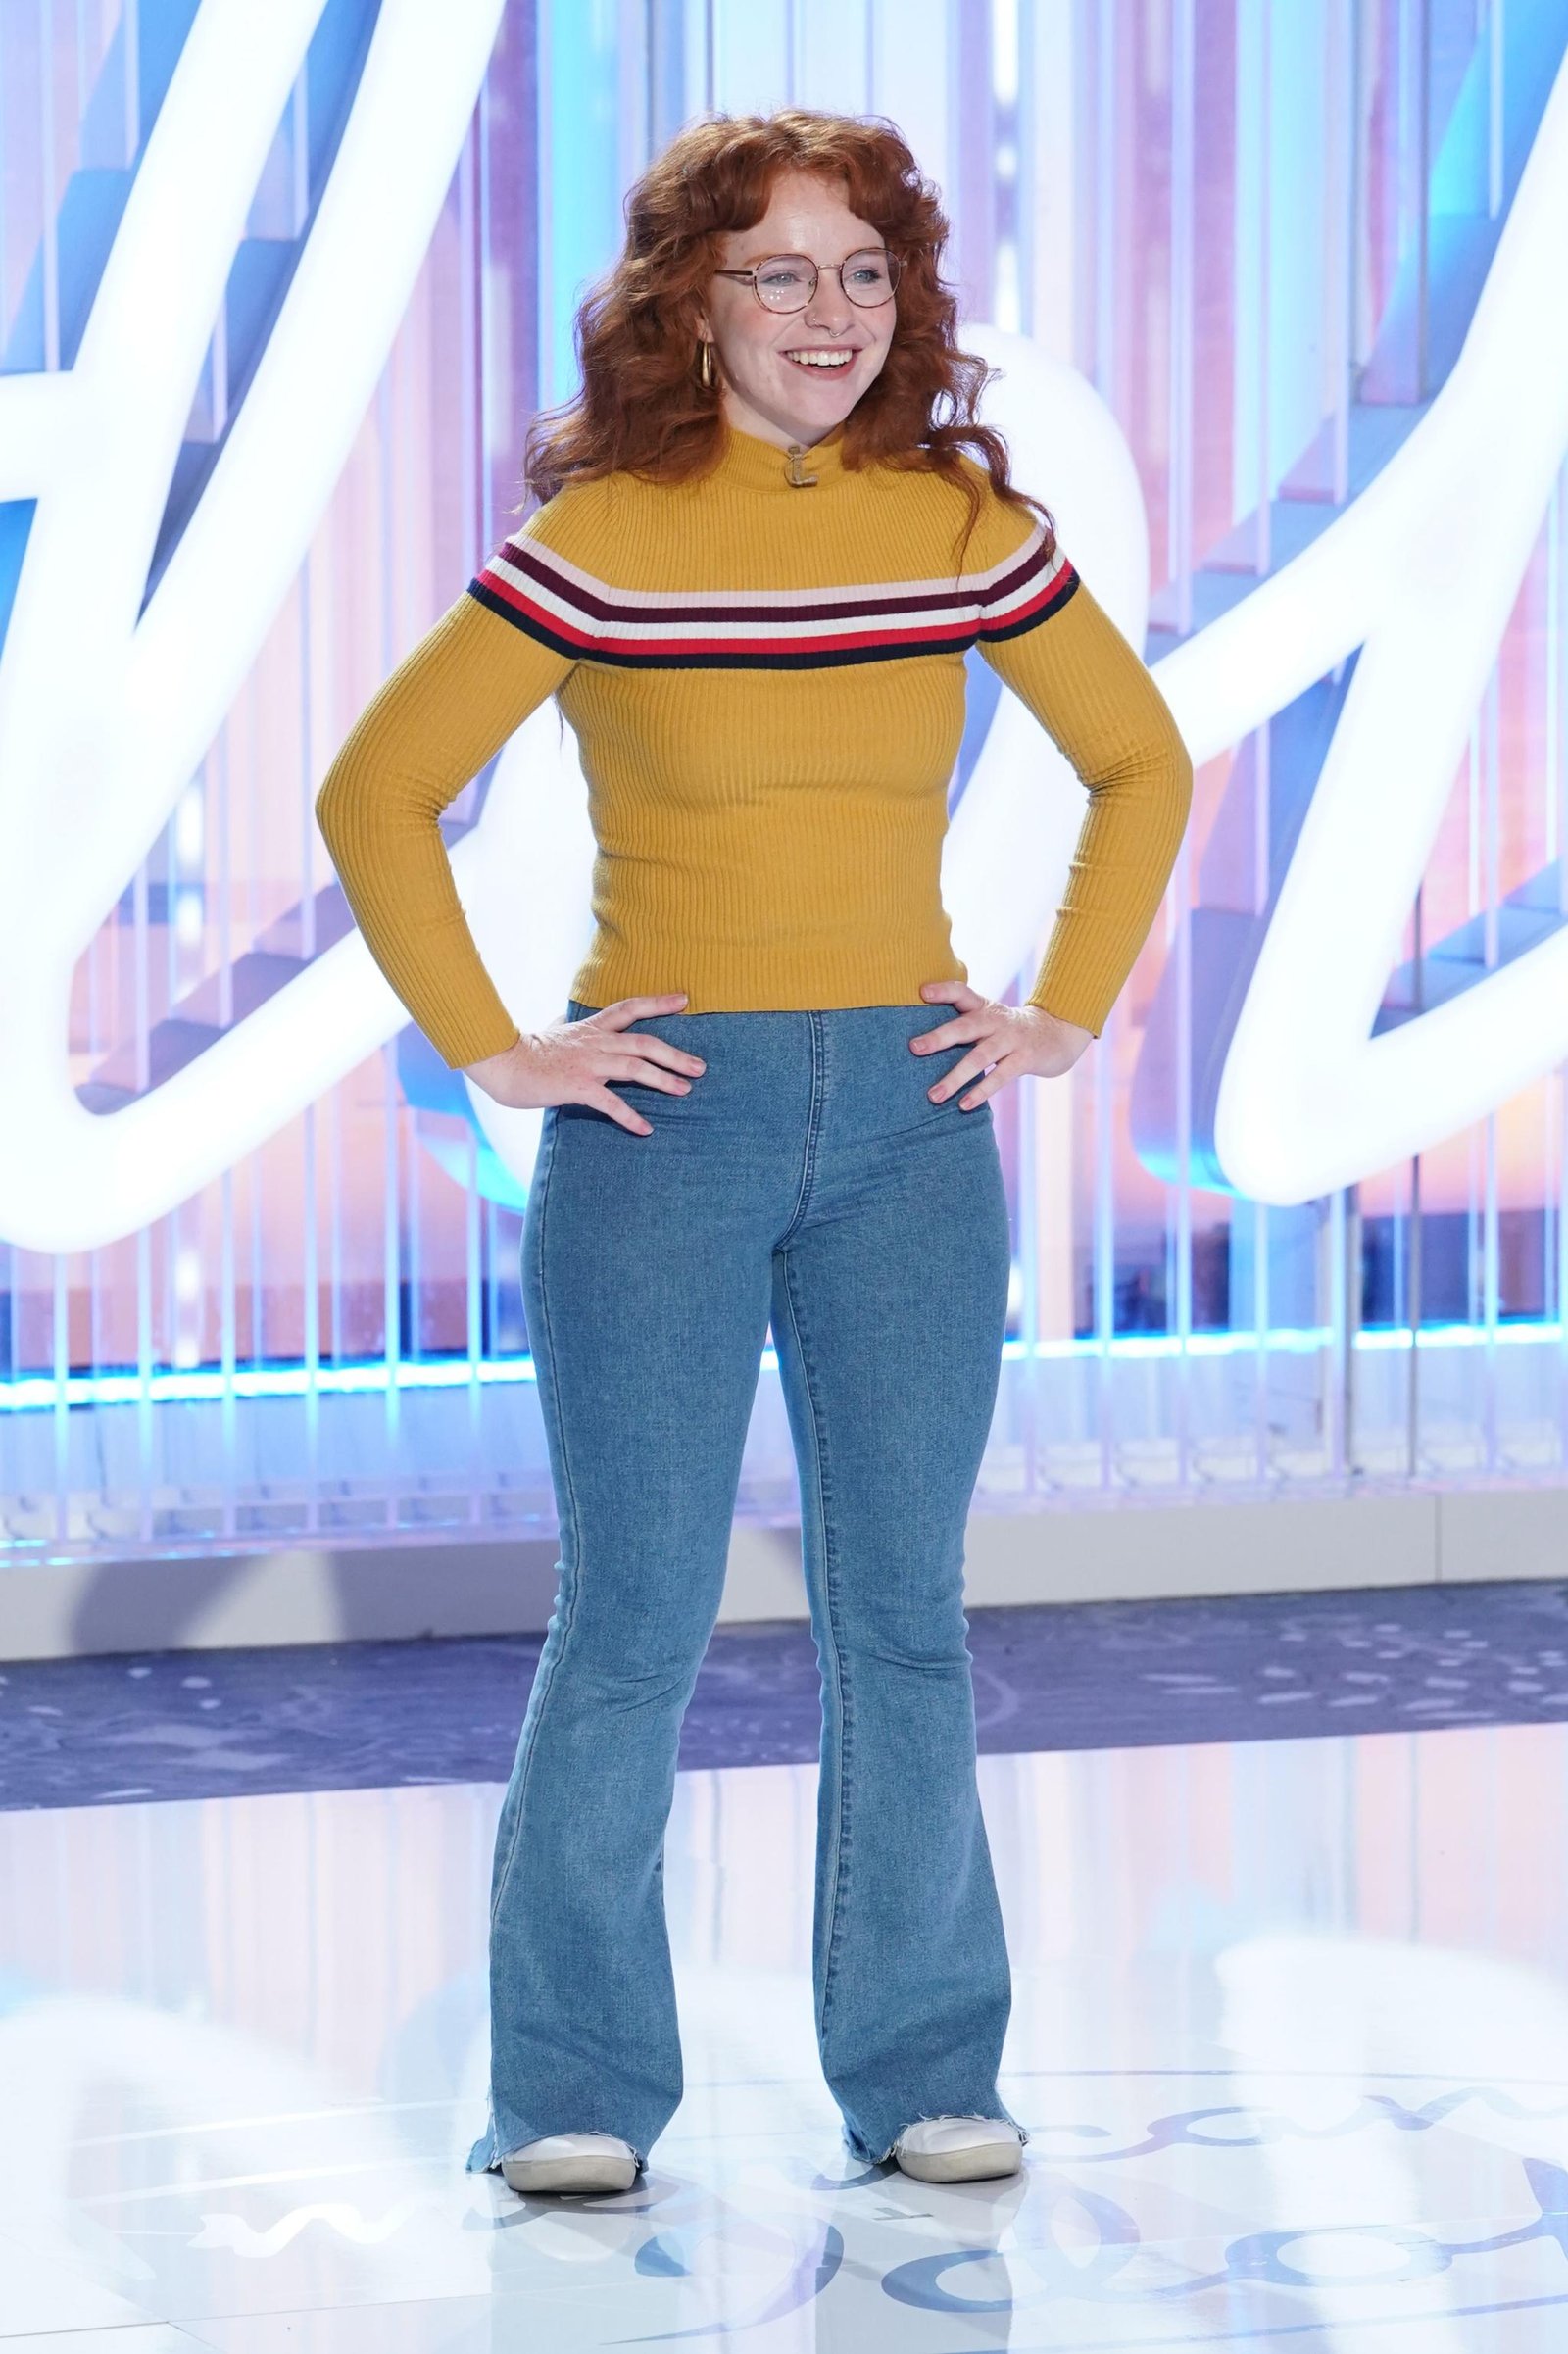 A contestant on "American Idol" during her audition.